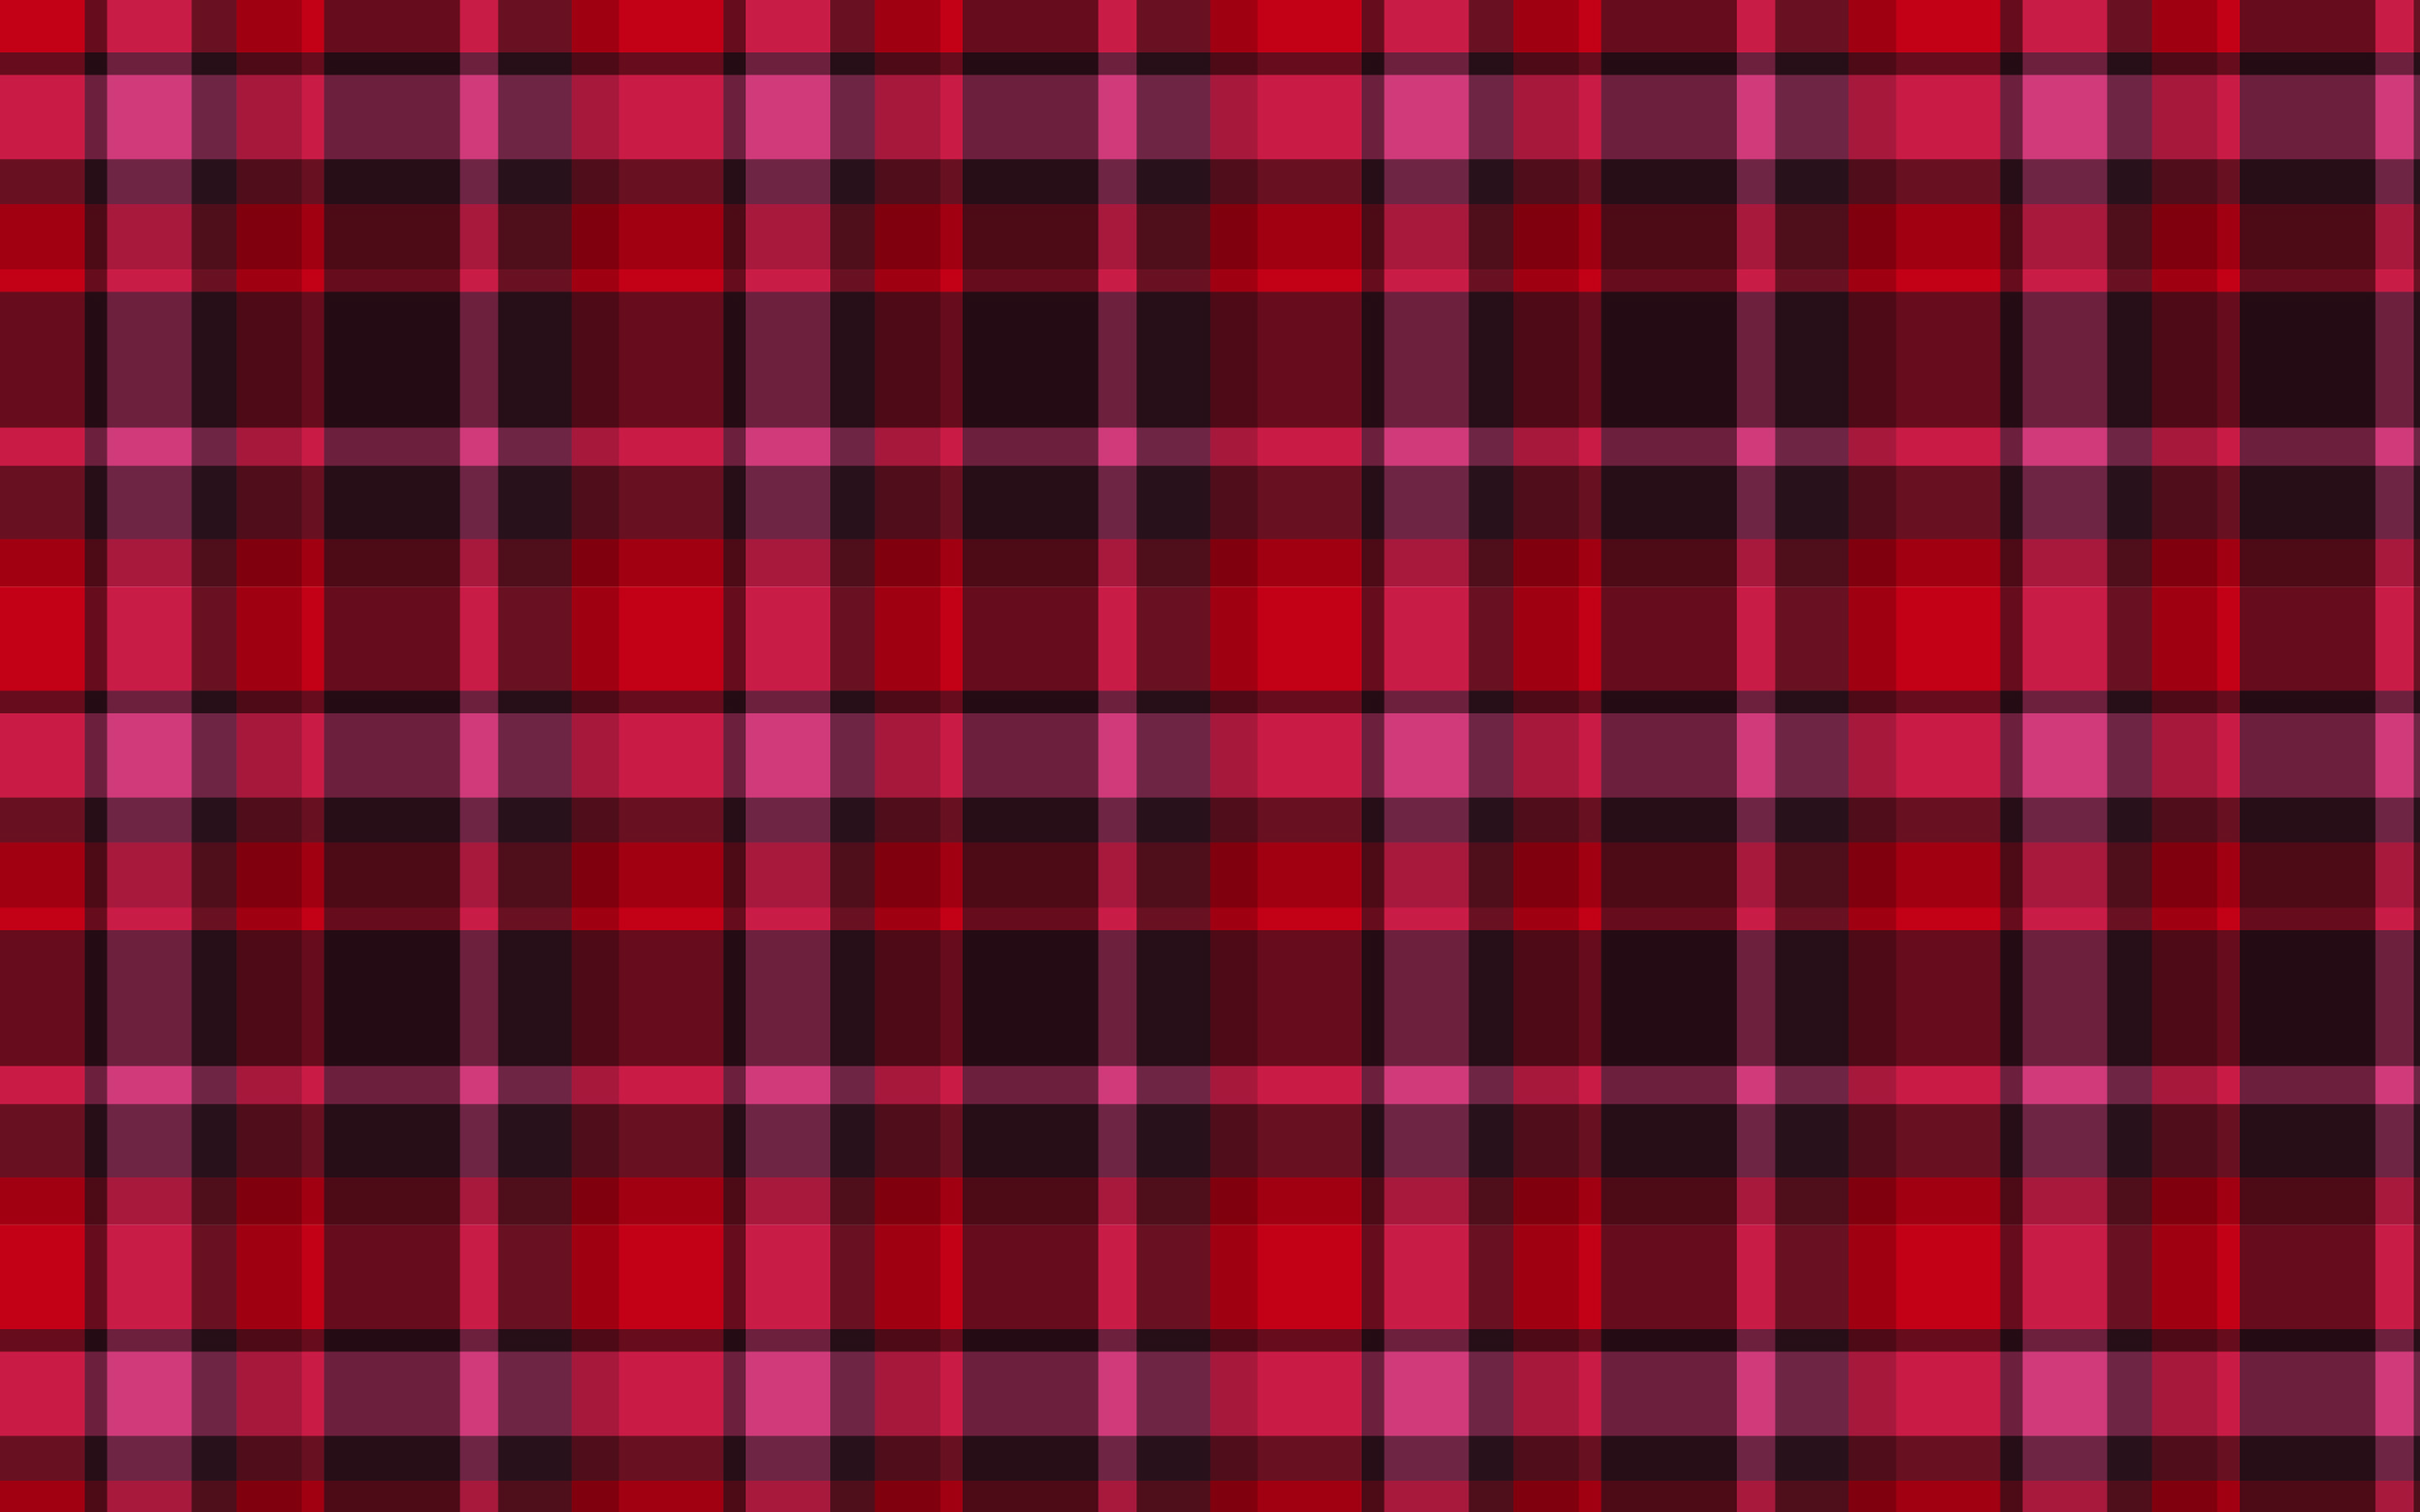 Download wallpaper red checkered fabric, macro, red fabric, checkered textures, red fabric background, red background for desktop with resolution 2880x1800. High Quality HD picture wallpaper